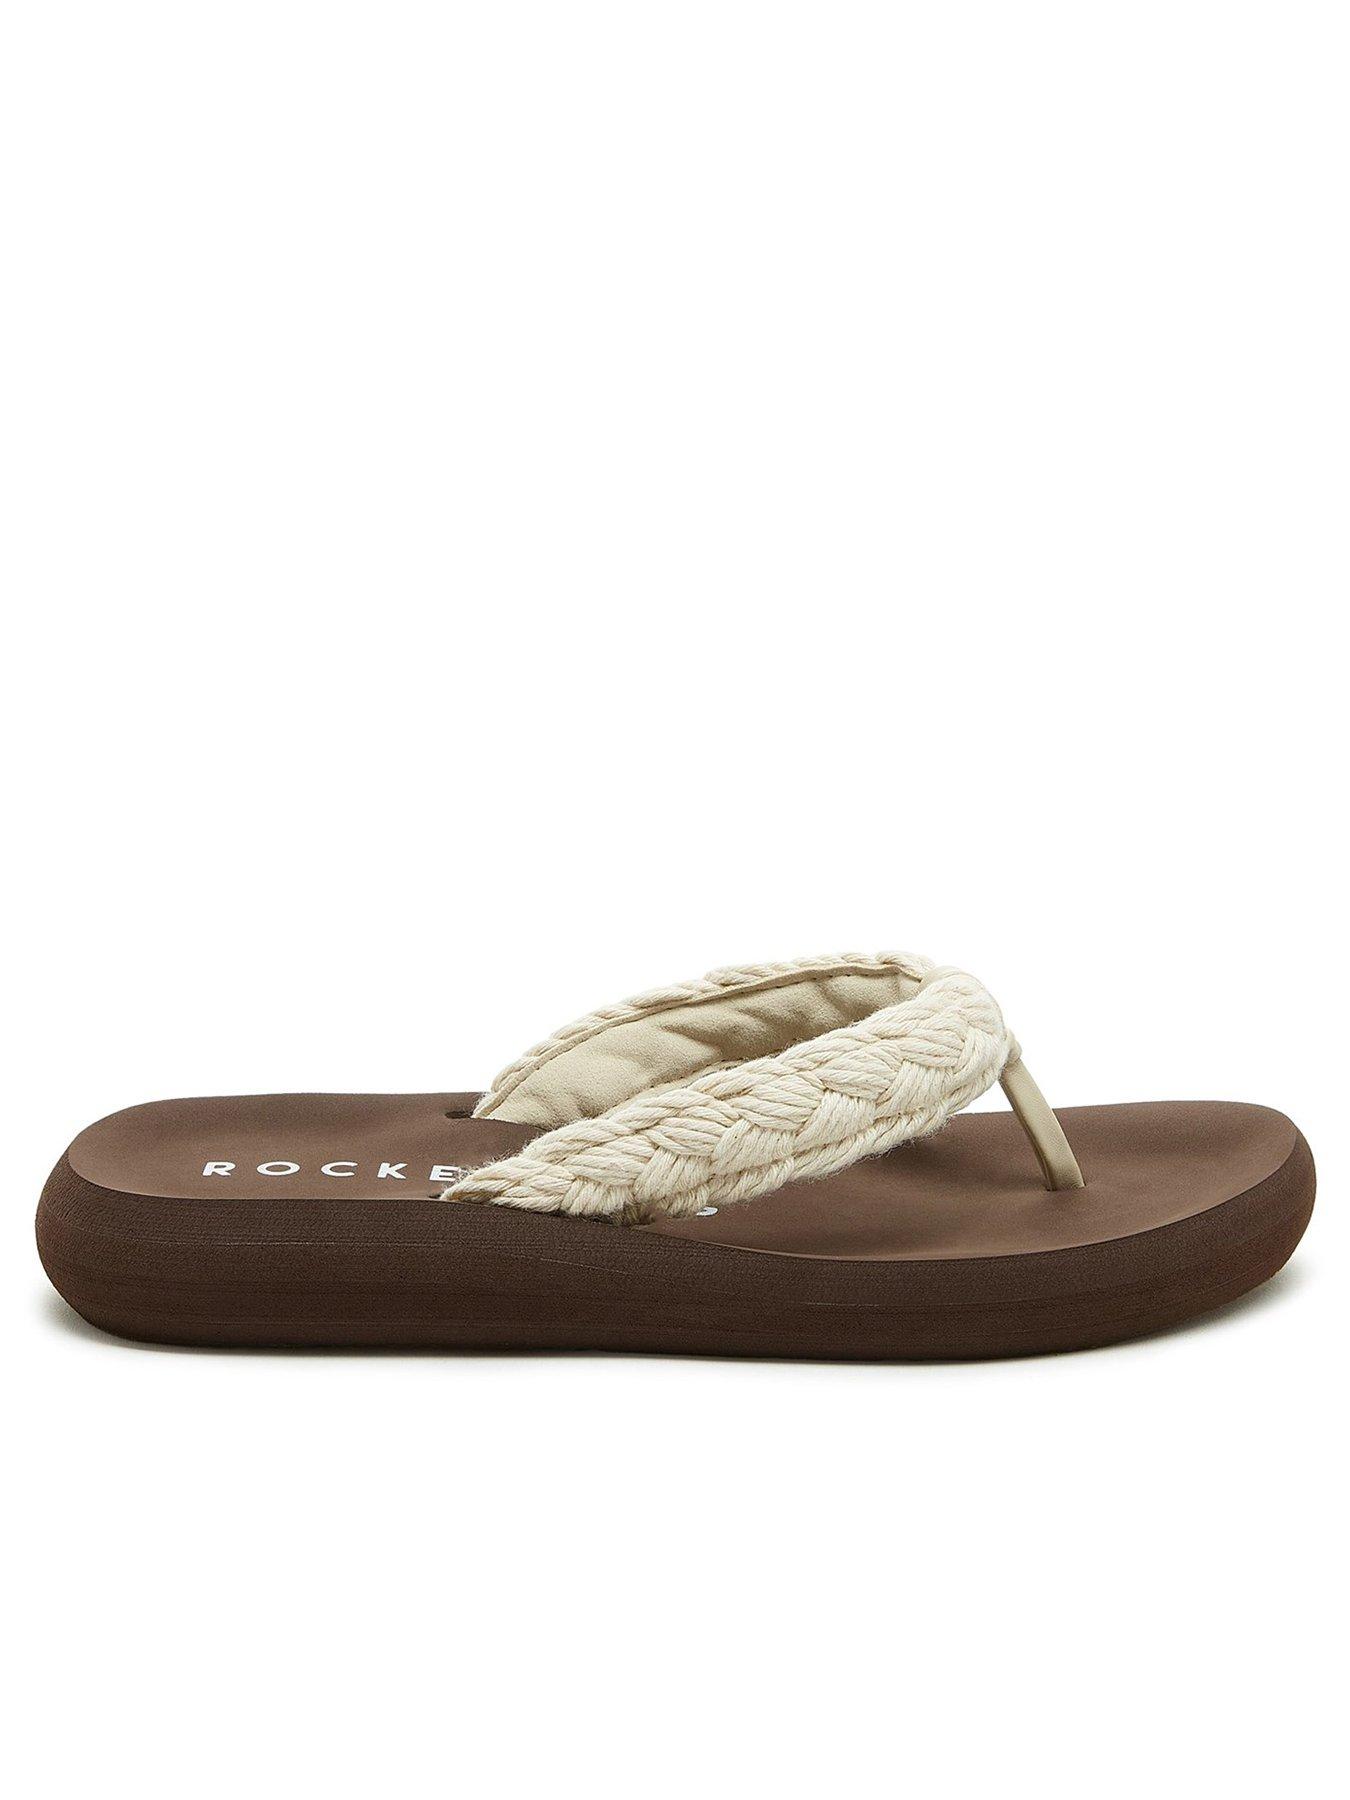 Rocket Dog Sunset Cord Toe Post Braided Sandals - Natural